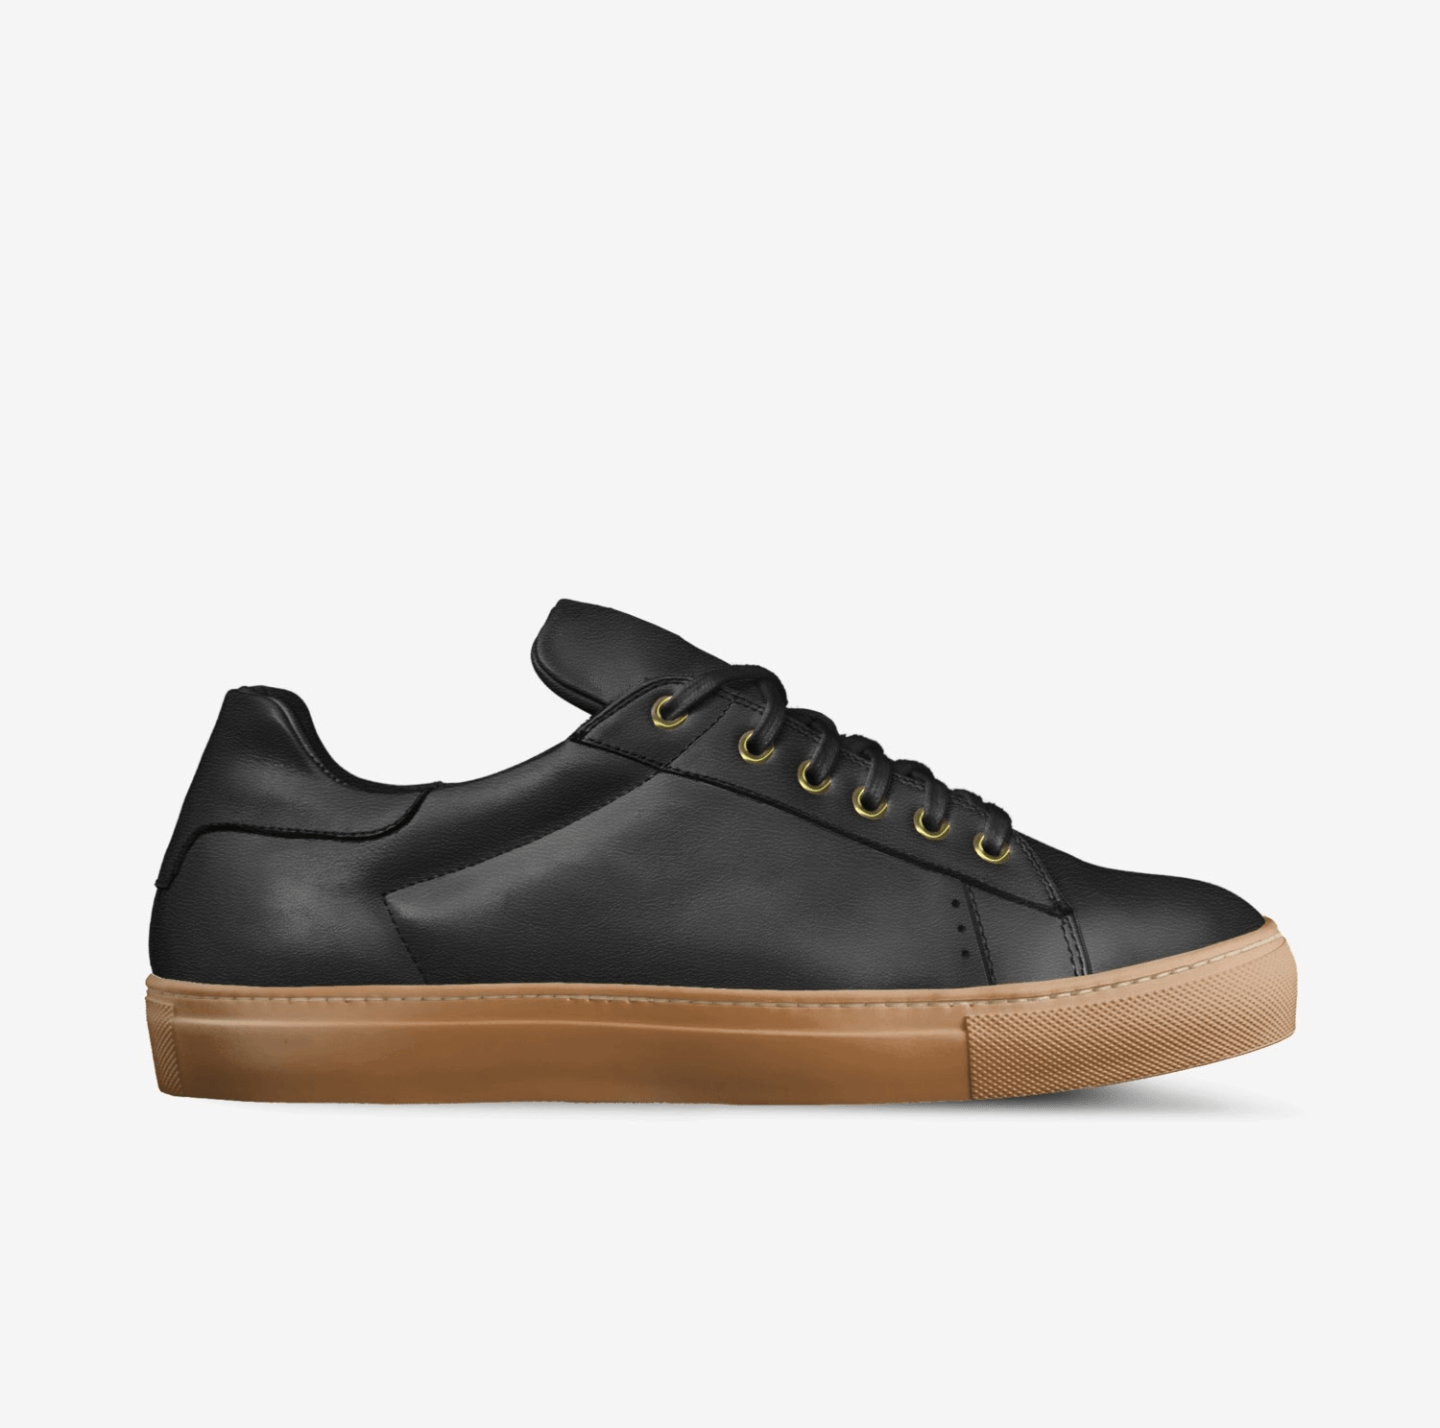 LORENZO LEATHER/GUM SOLE SNEAKERS IN BLACK | Poor Little Rich Boy Clothing